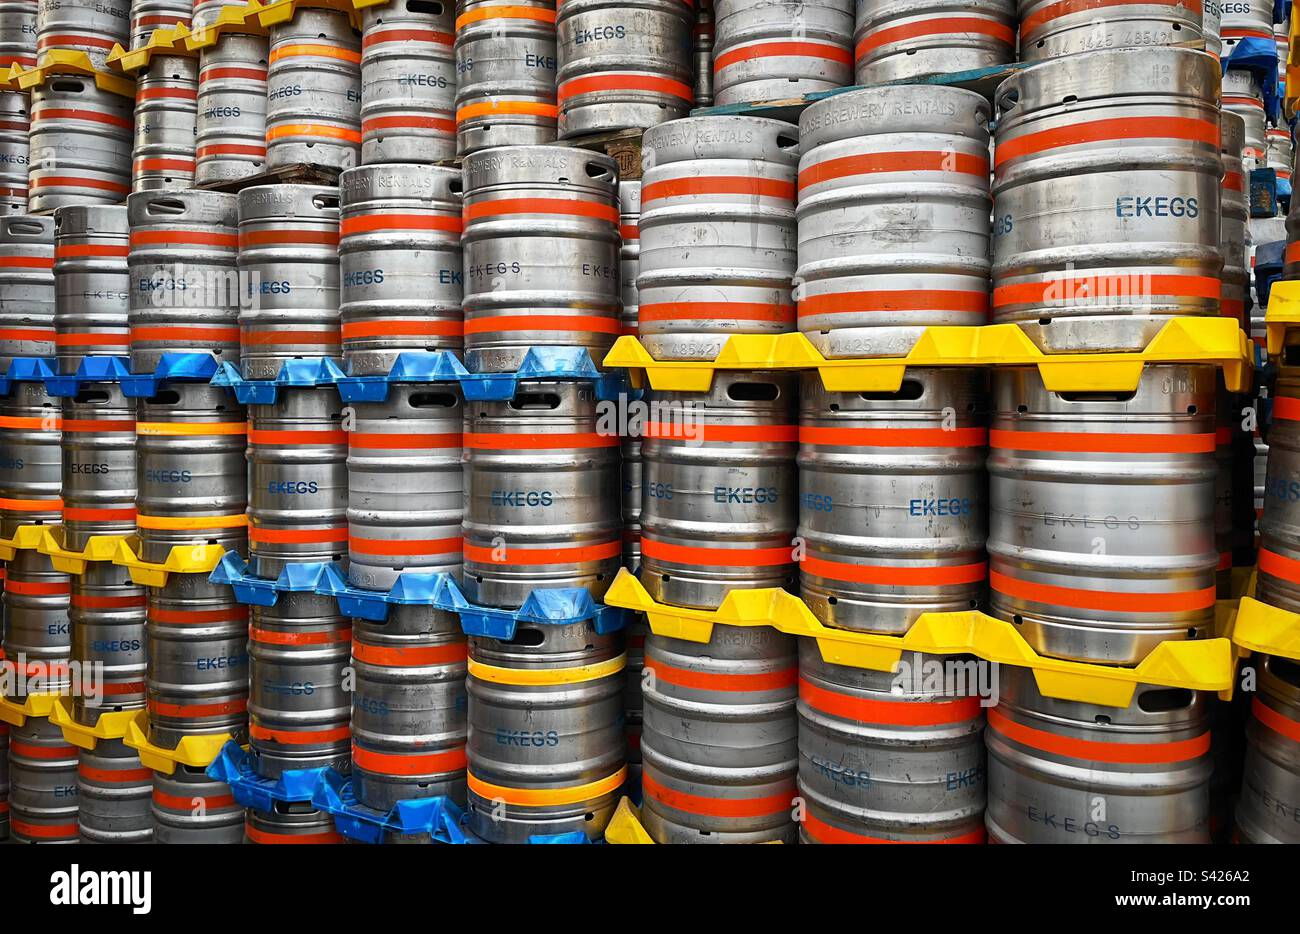 ‘The last keg’ beer kegs stacked up, ready to be transported to their destination. Stock Photo